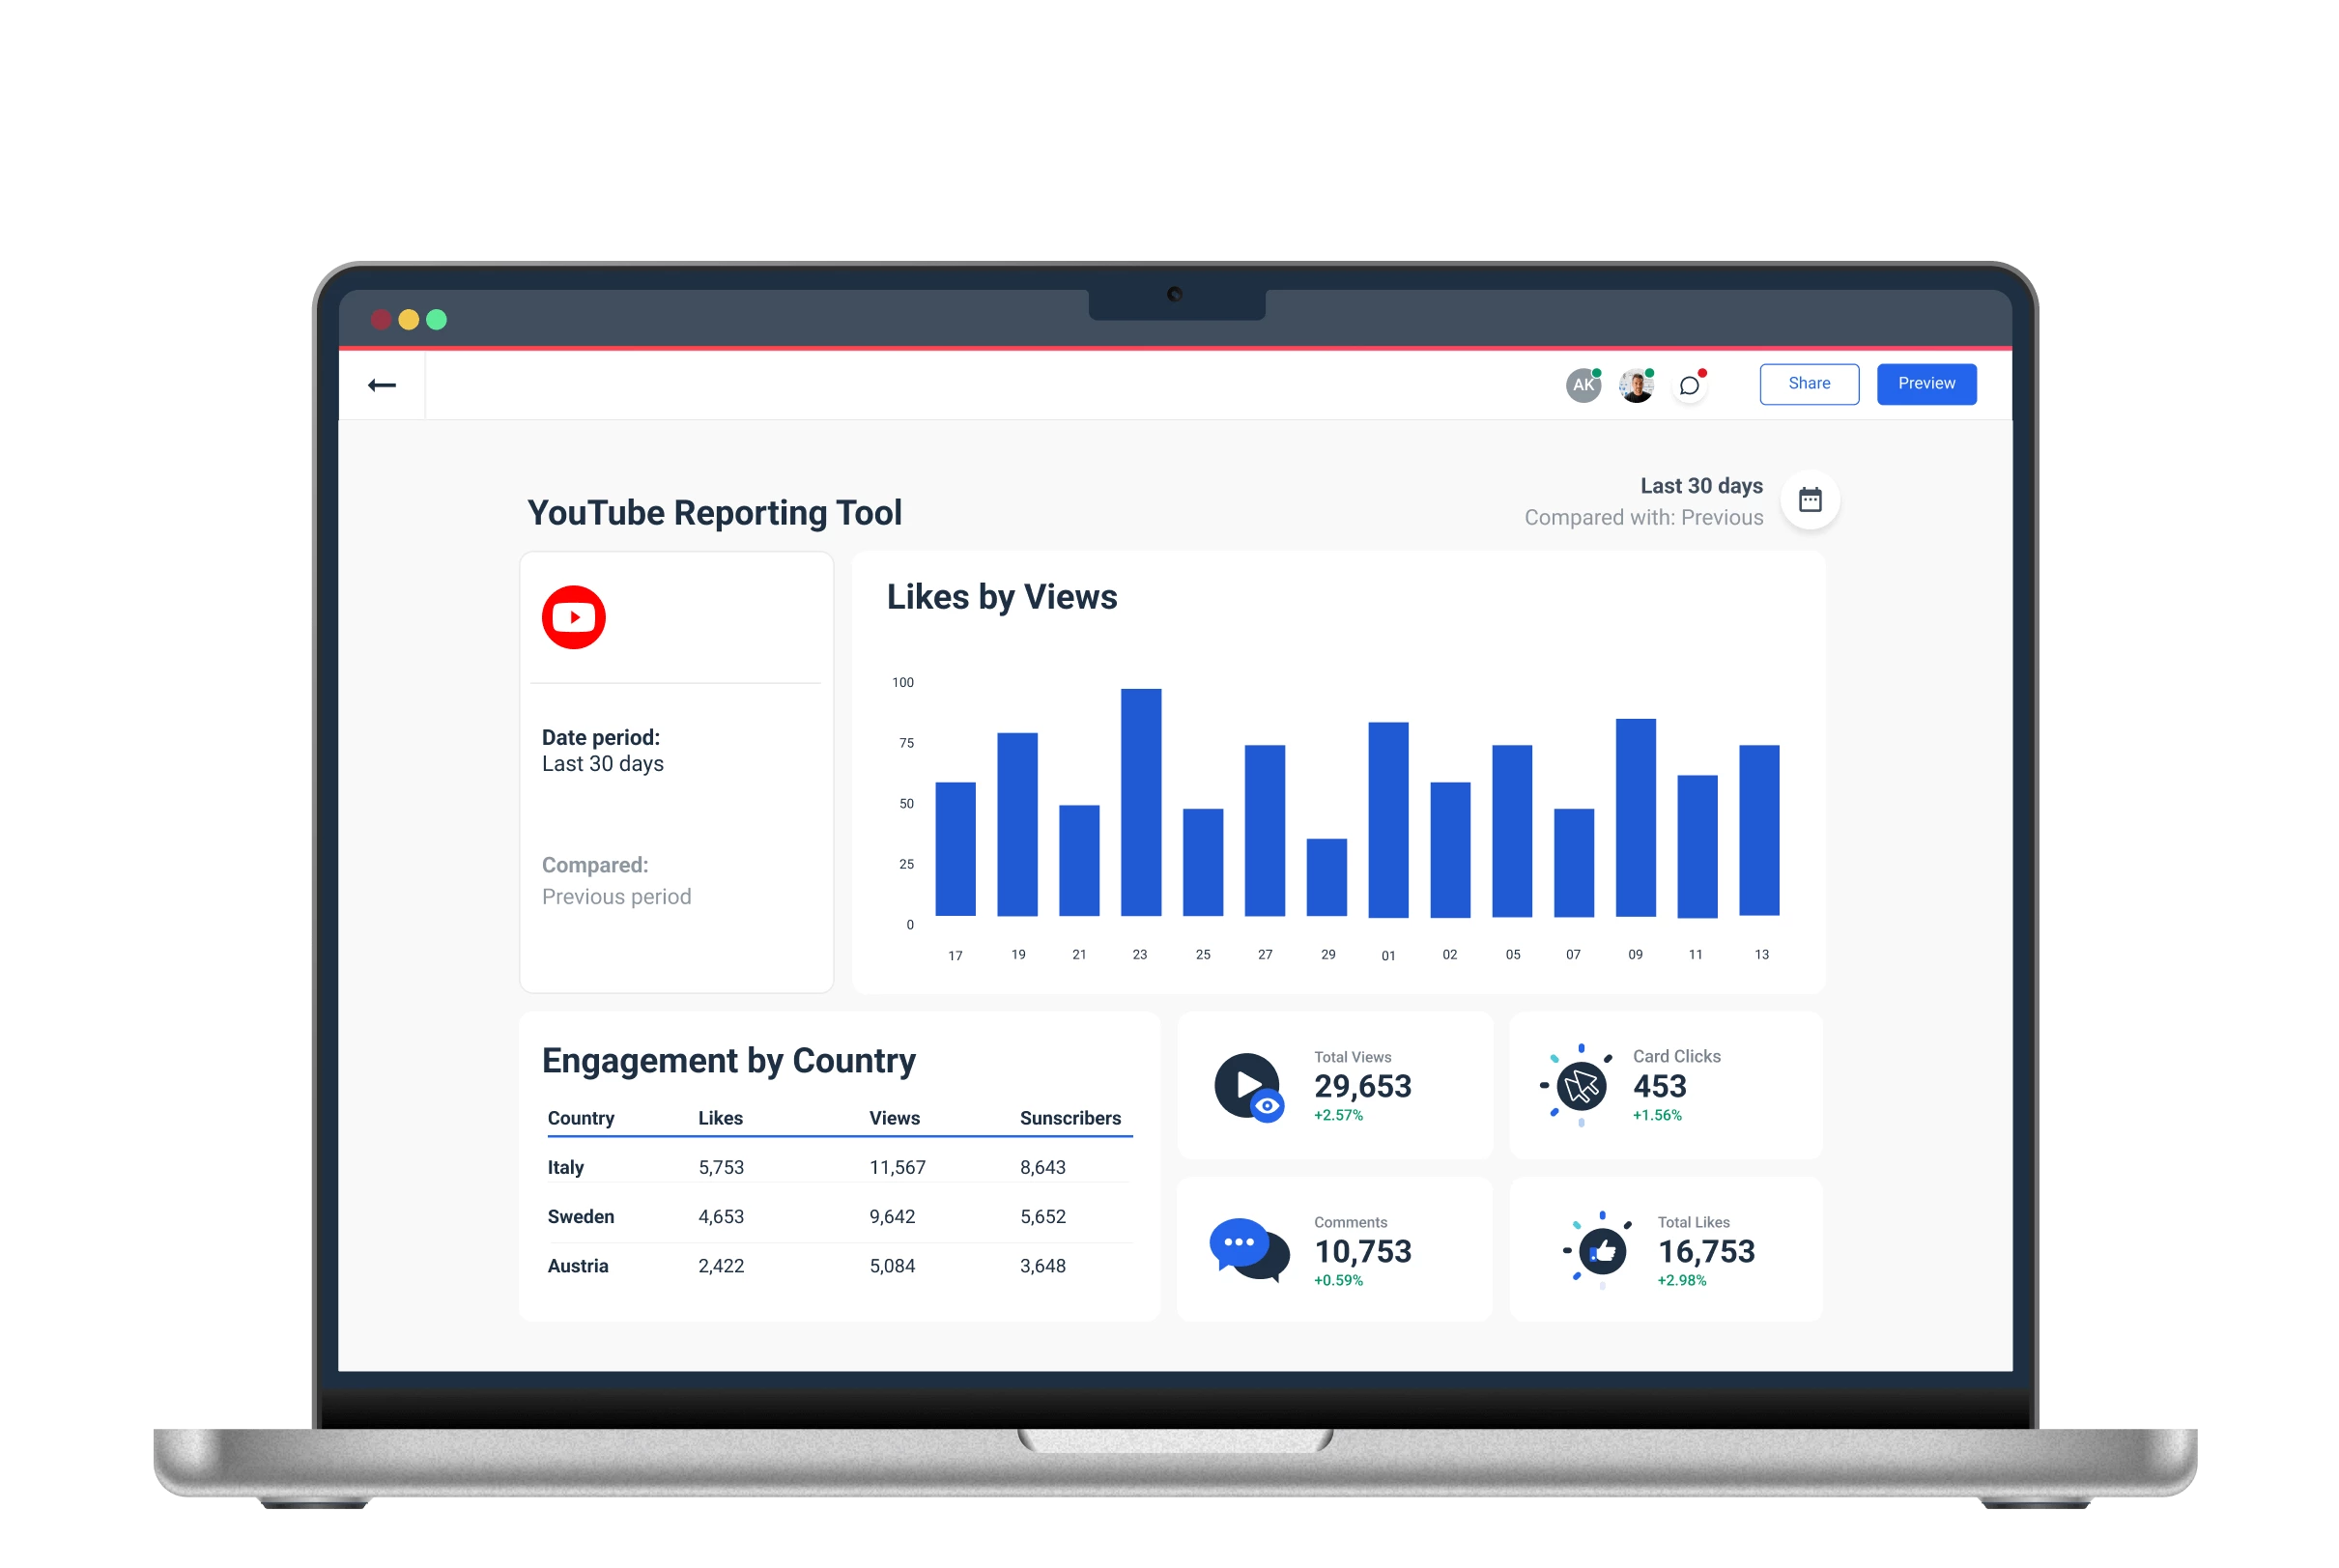 A Complete YouTube Reporting Tool for Agencies